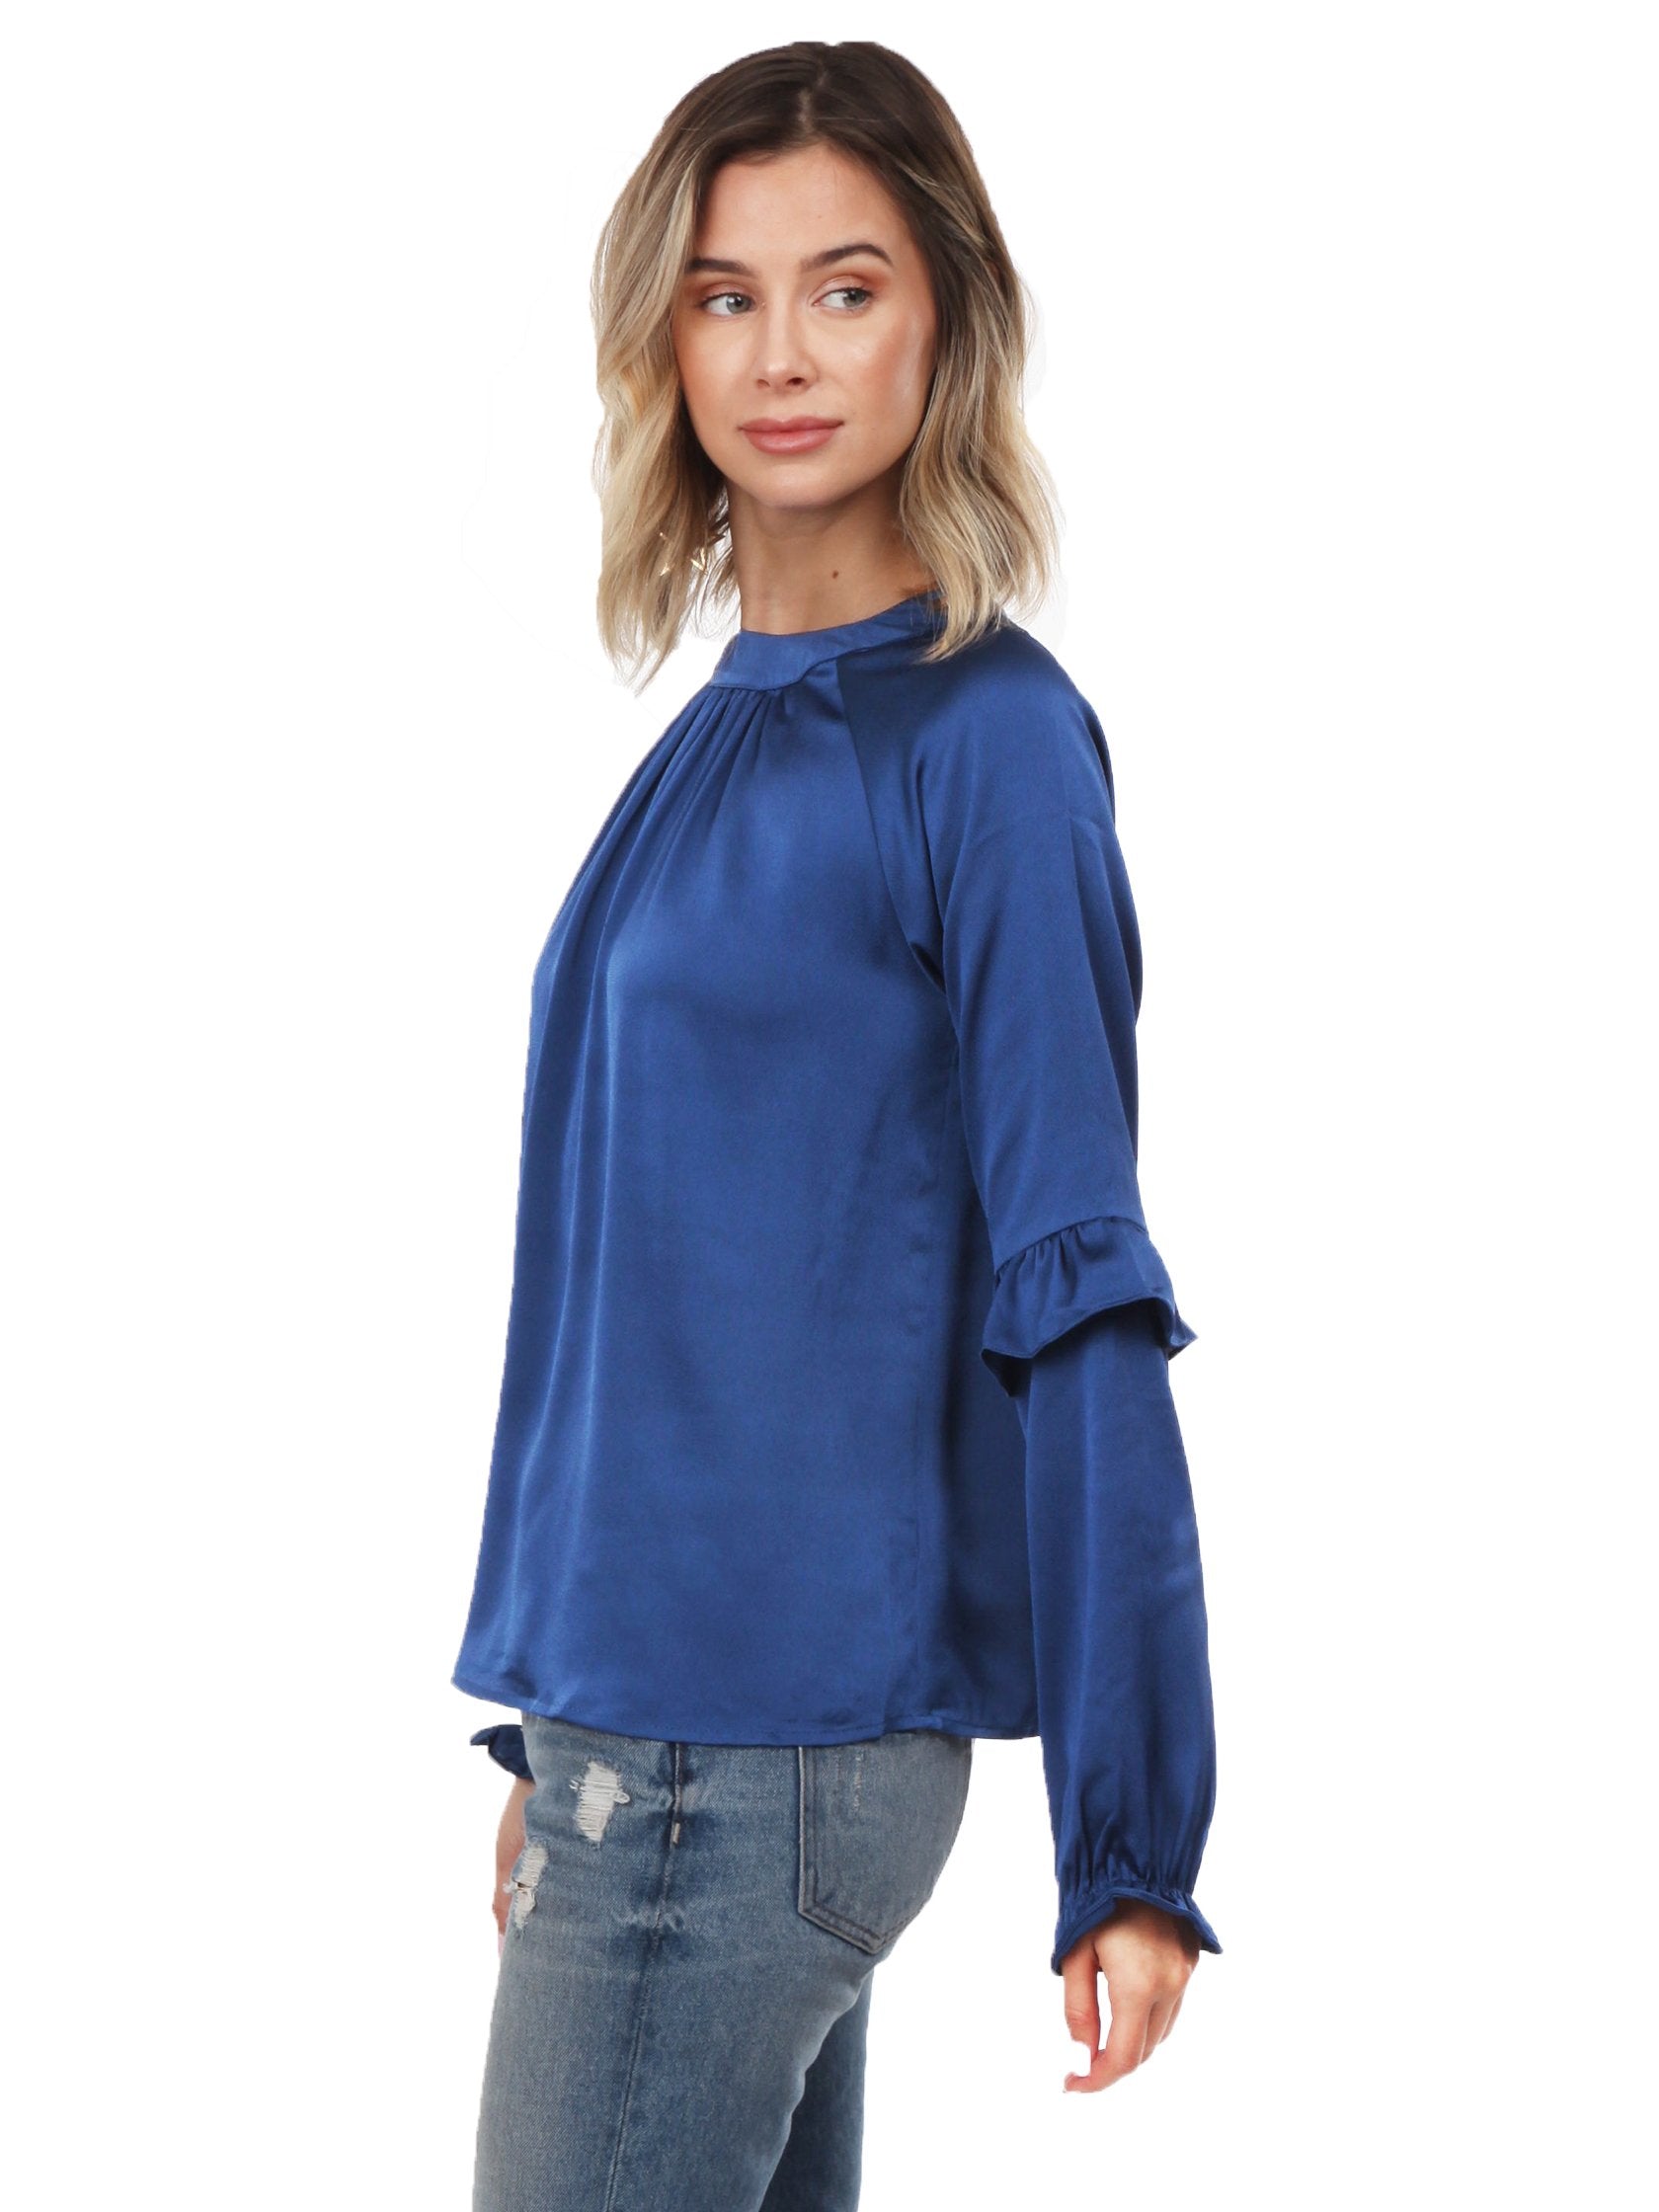 Women outfit in a top rental from LOST + WANDER called Elsa L/s Satin Top